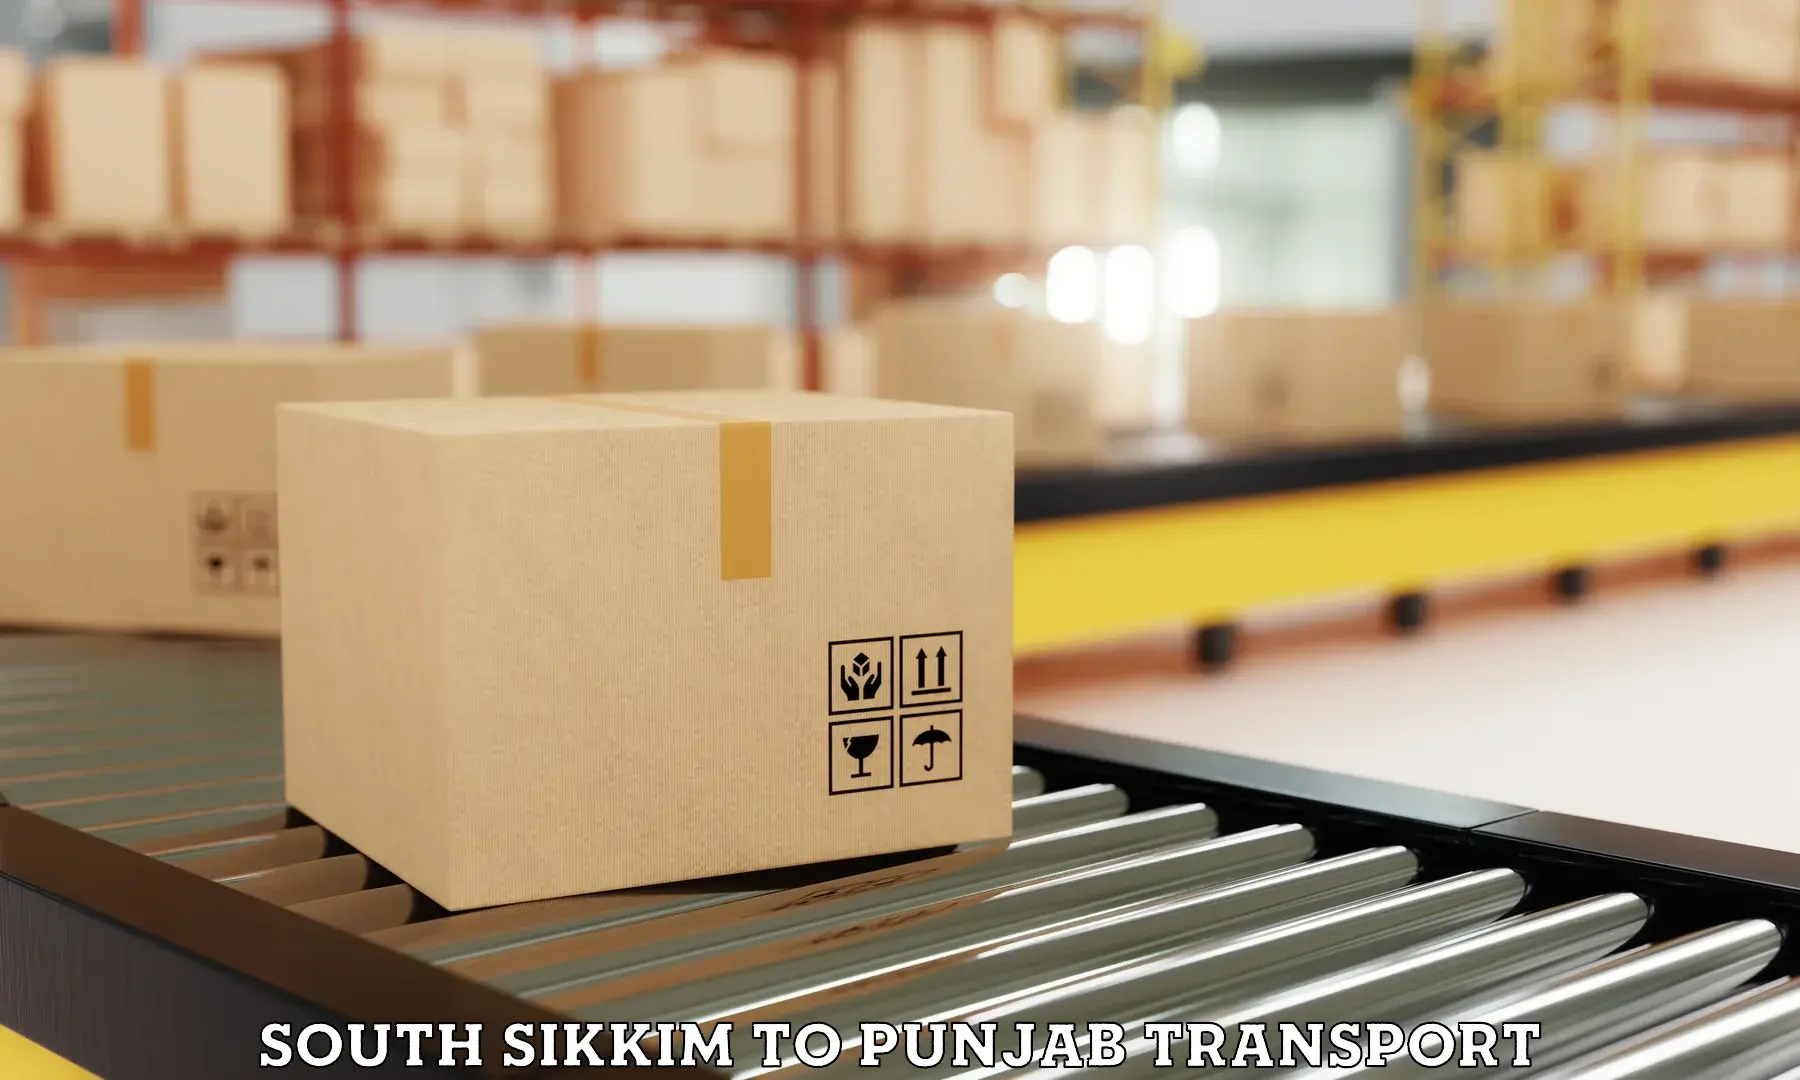 Pick up transport service in South Sikkim to Punjab